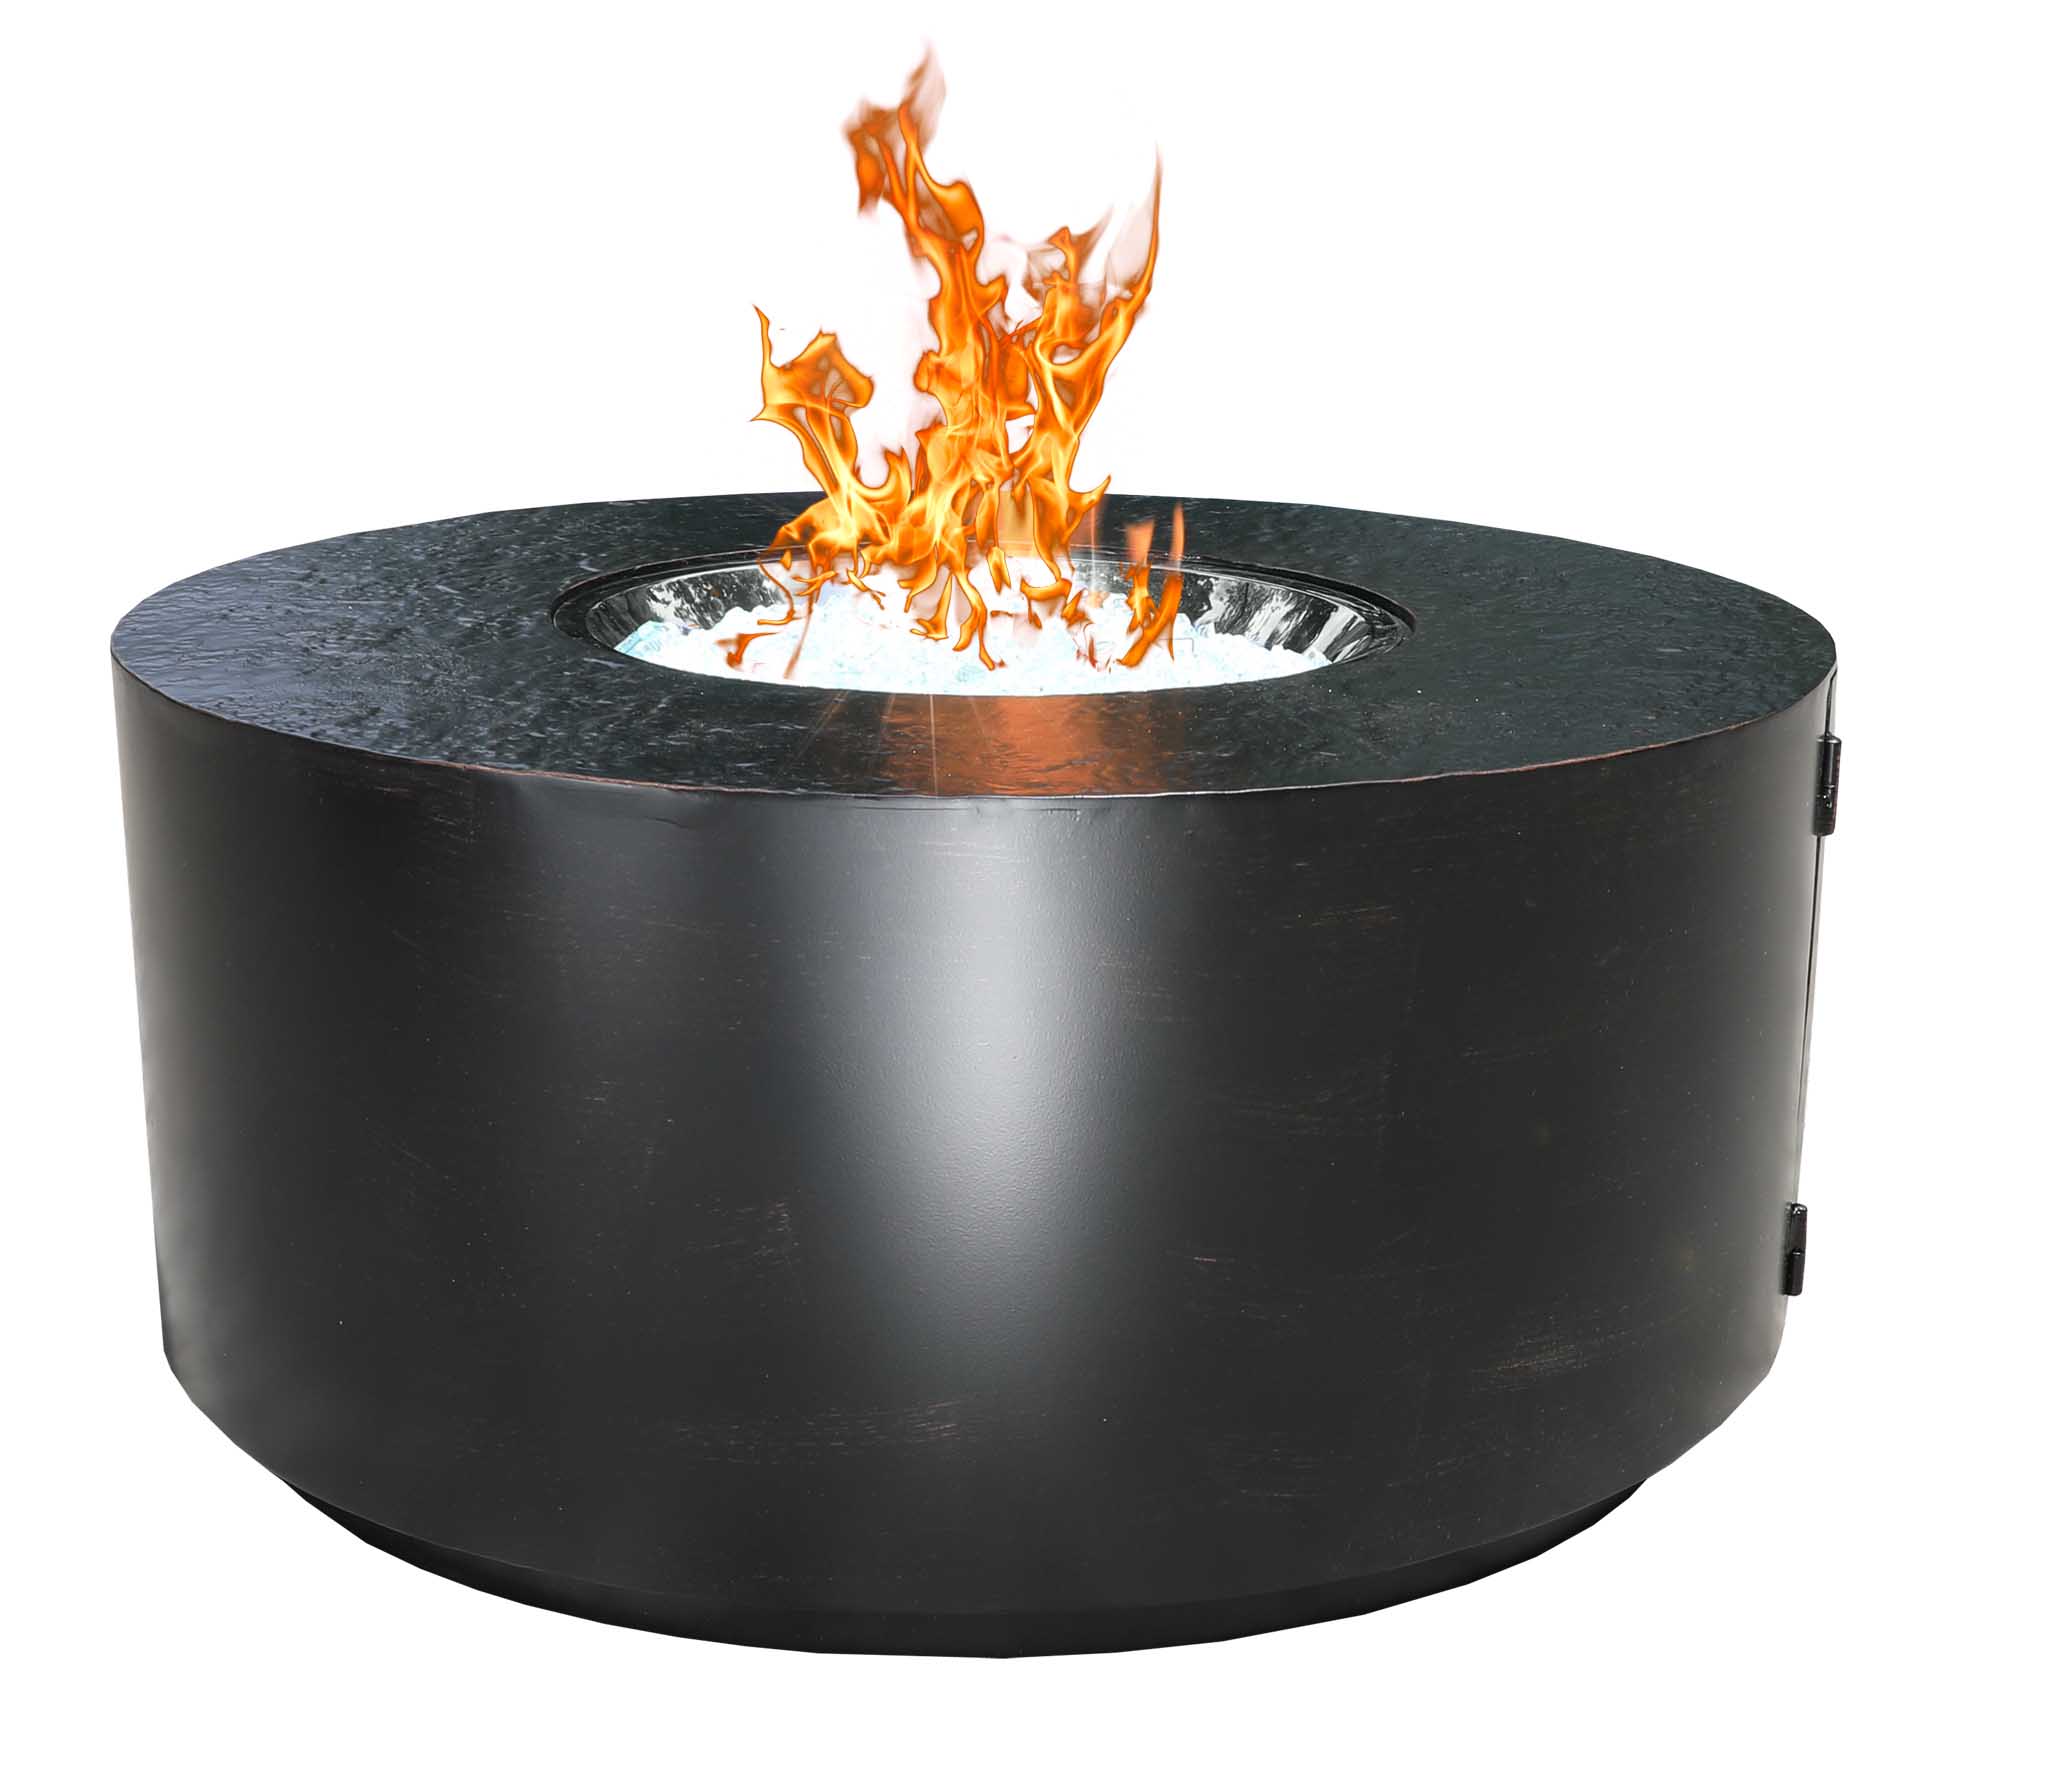 Outdoor Fire Pits, Are Propane Fire Pits Legal In Brampton